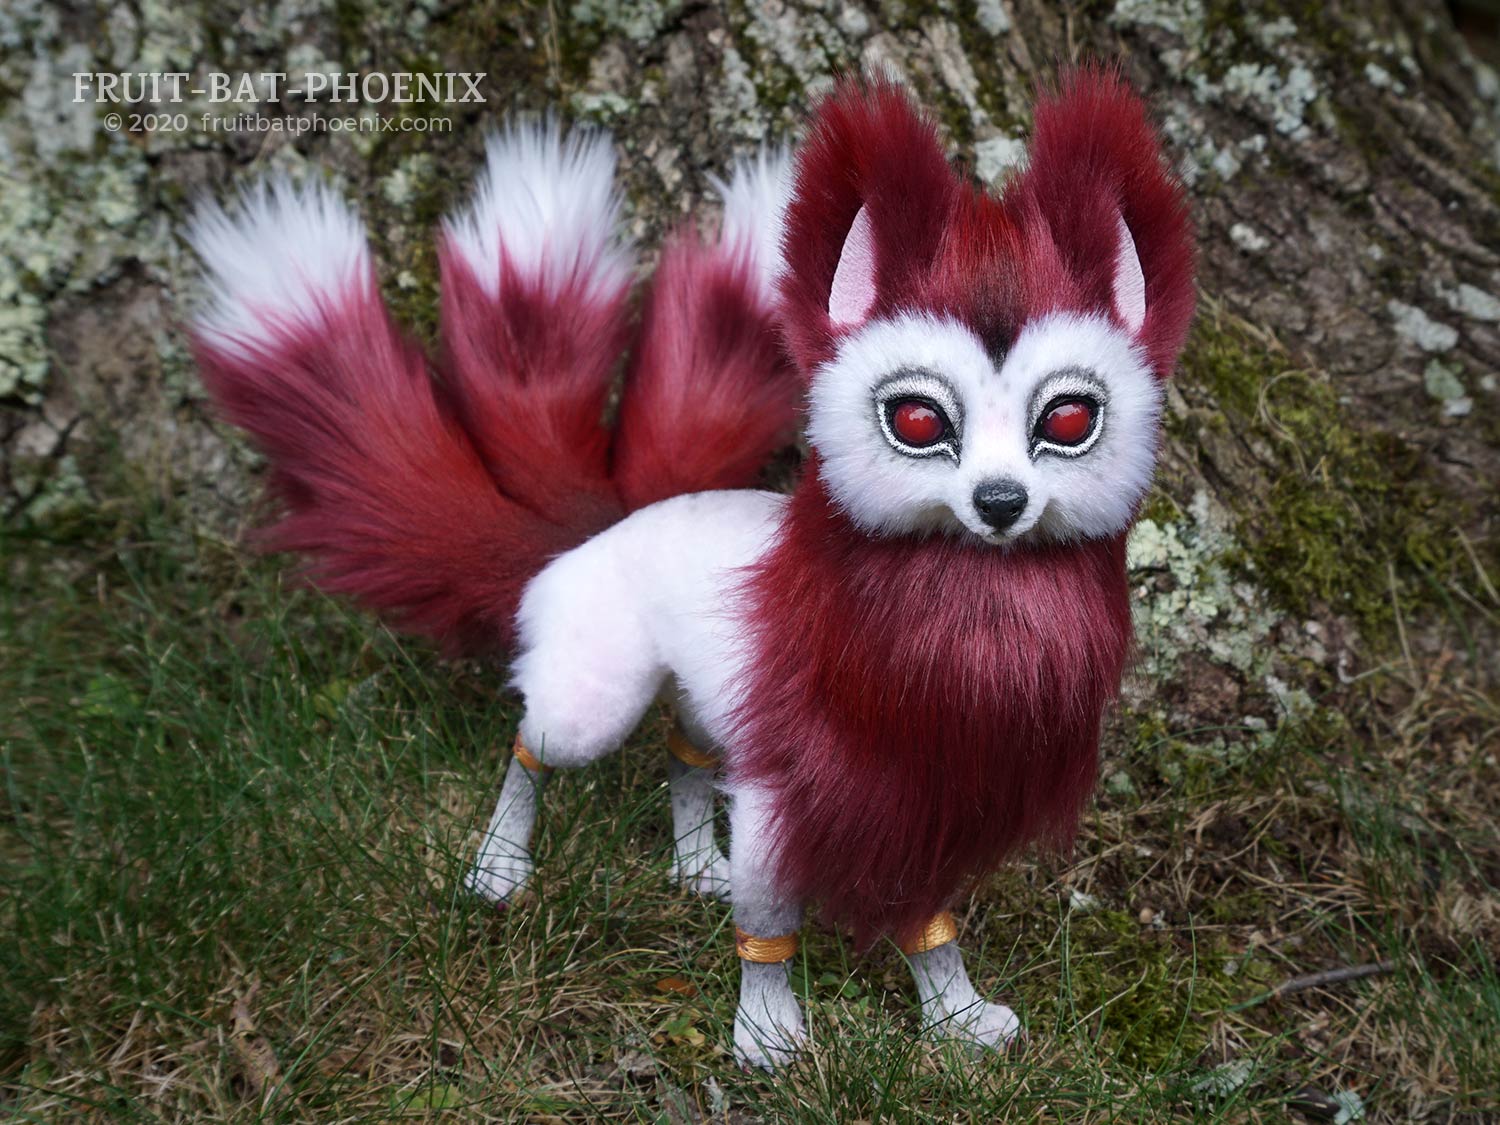 Burgundy and white kitsune posable art doll with three tails